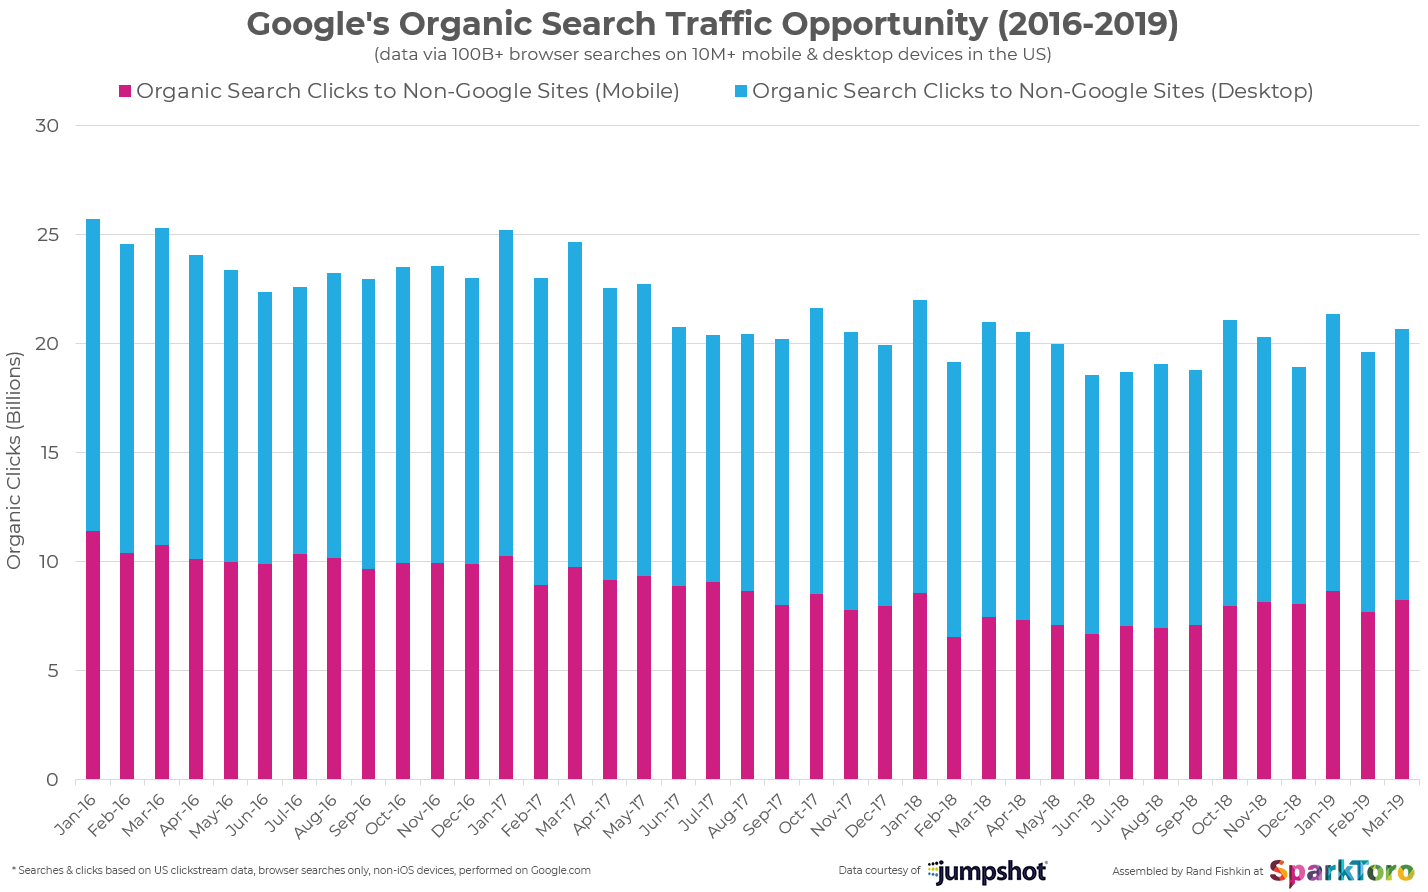 Google's organic search traffic opportunities (2016 - 2019) - Chart